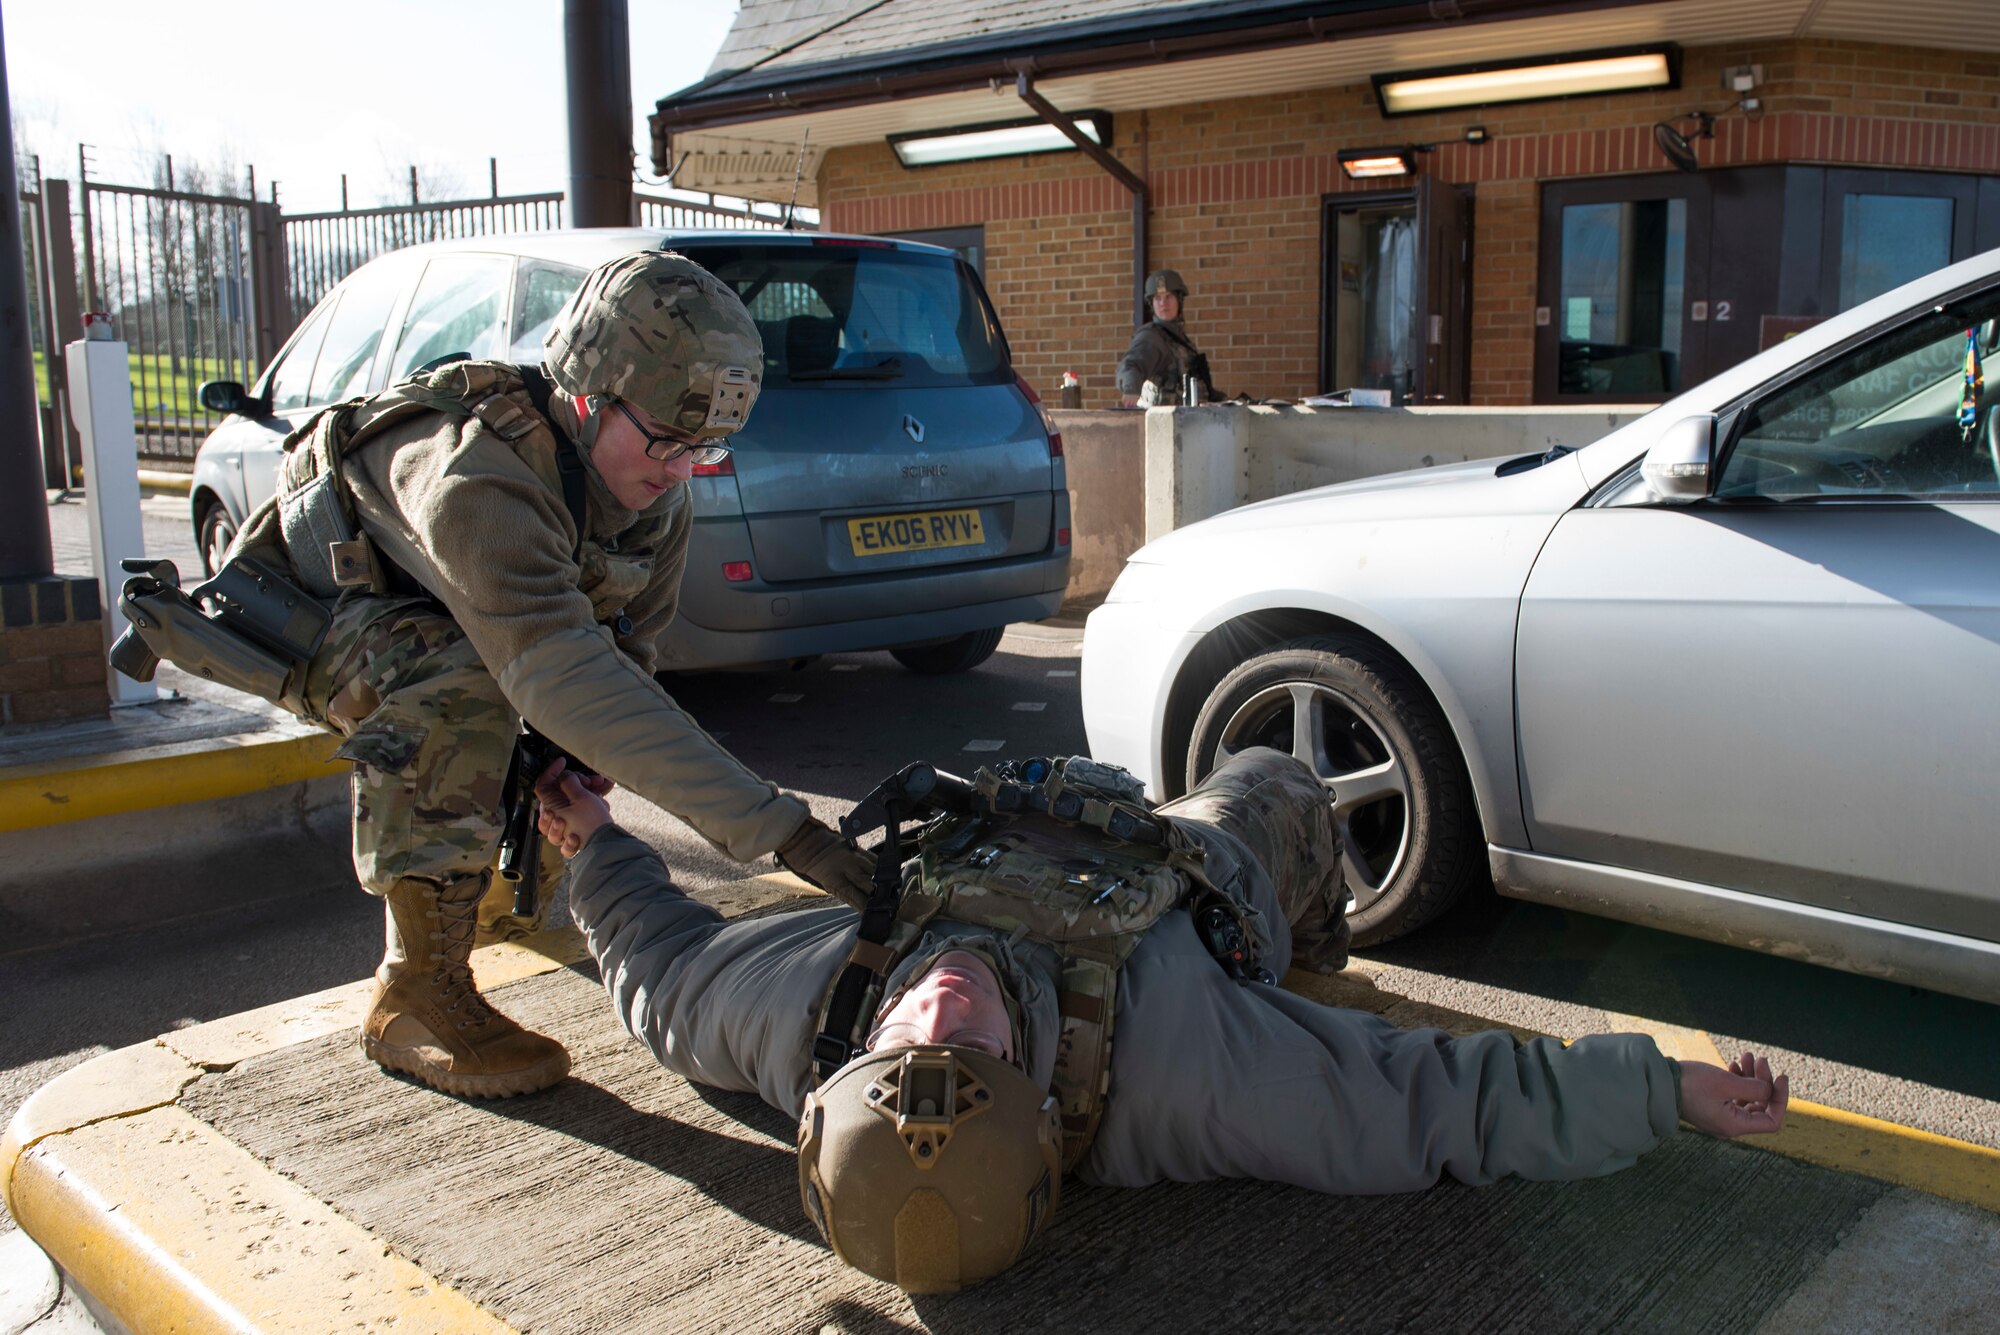 U.S. Air Force Airman 1st Class Graham Stubblefield, 422nd Security Forces Squadron installation entry controller, assists a simulated casualty during the 501st Combat Support Wing Readiness Exercise 20-01 at RAF Croughton, England, Feb. 12, 2020. The exercise tested the wing’s preparedness and response capabilities to an emergency situation. (U.S. Air Force photo by Airman 1st Class Jennifer Zima)